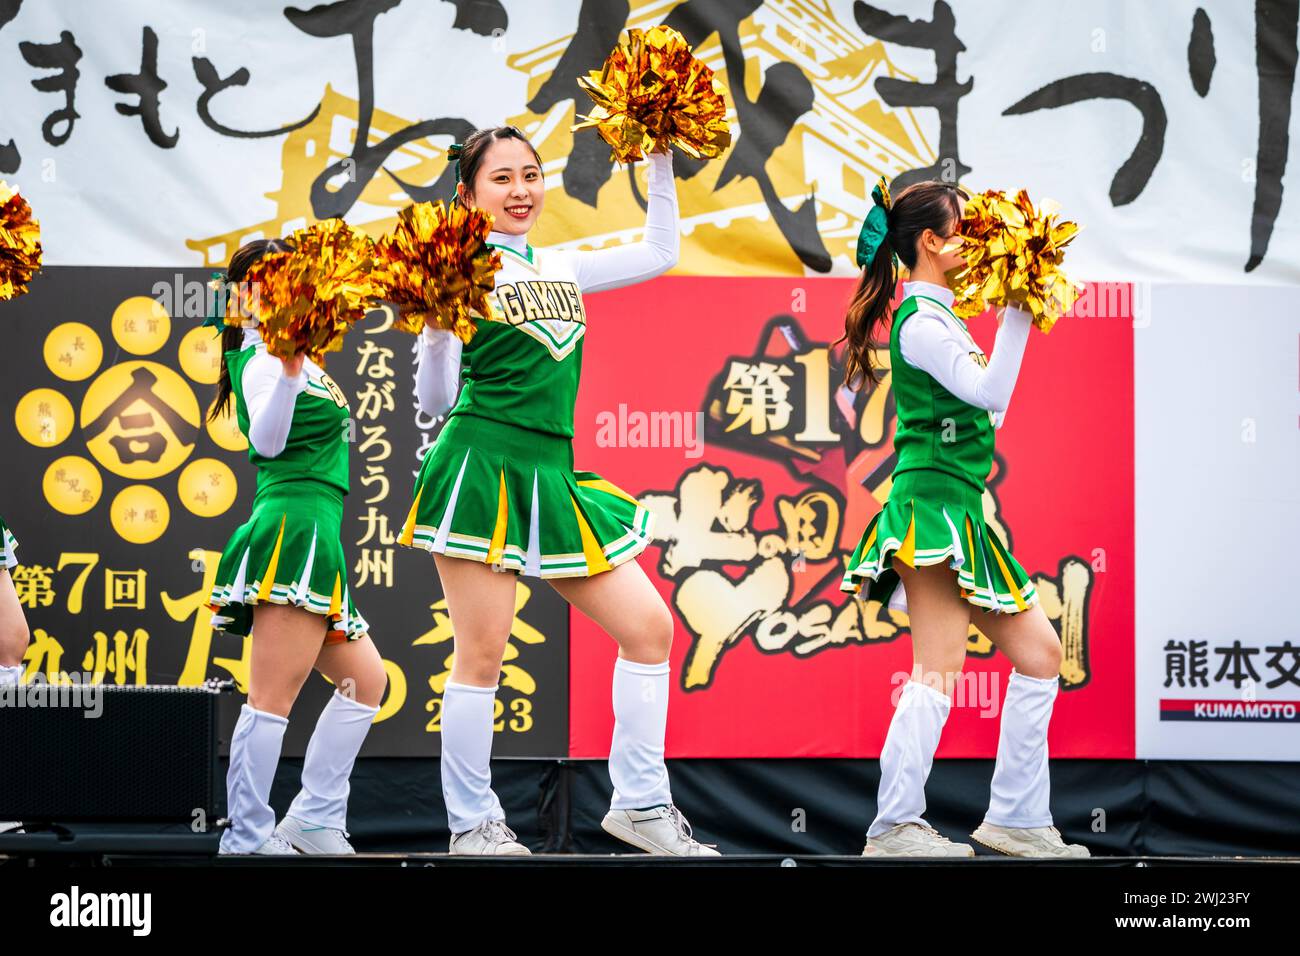 Japanese teenage women cheerleader Yosakoi dance team in green costumes dancing on stage holding gold glittery pom poms, one woman turned to look. Stock Photo